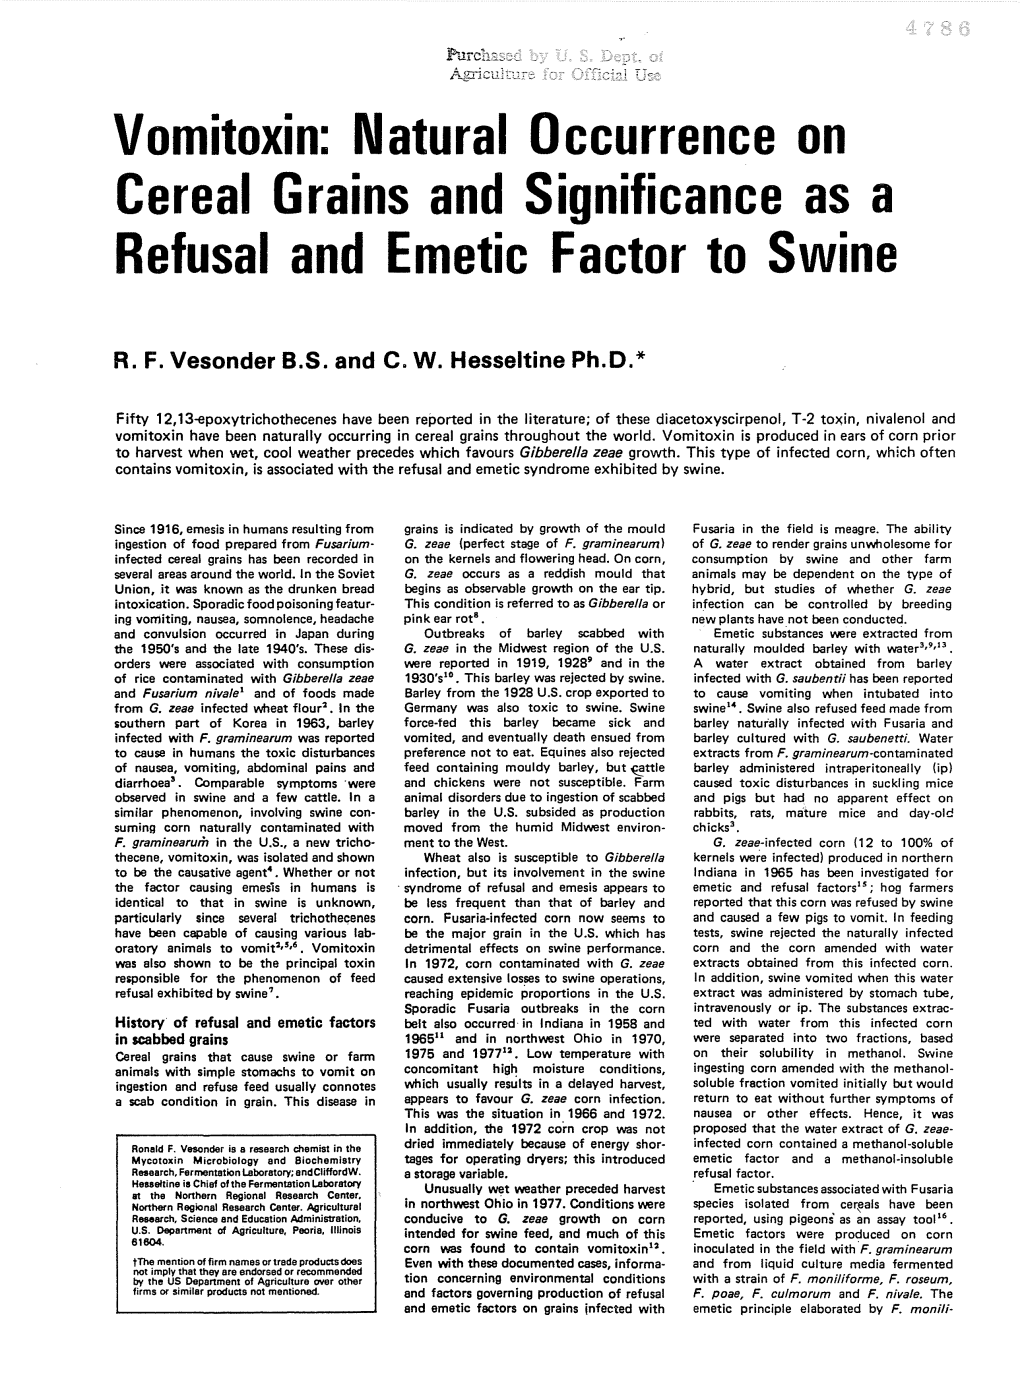 Vomitoxin: Natural Occurrence on Cereal Grains and Significance As a Refusal and Emetic Factor to Swine